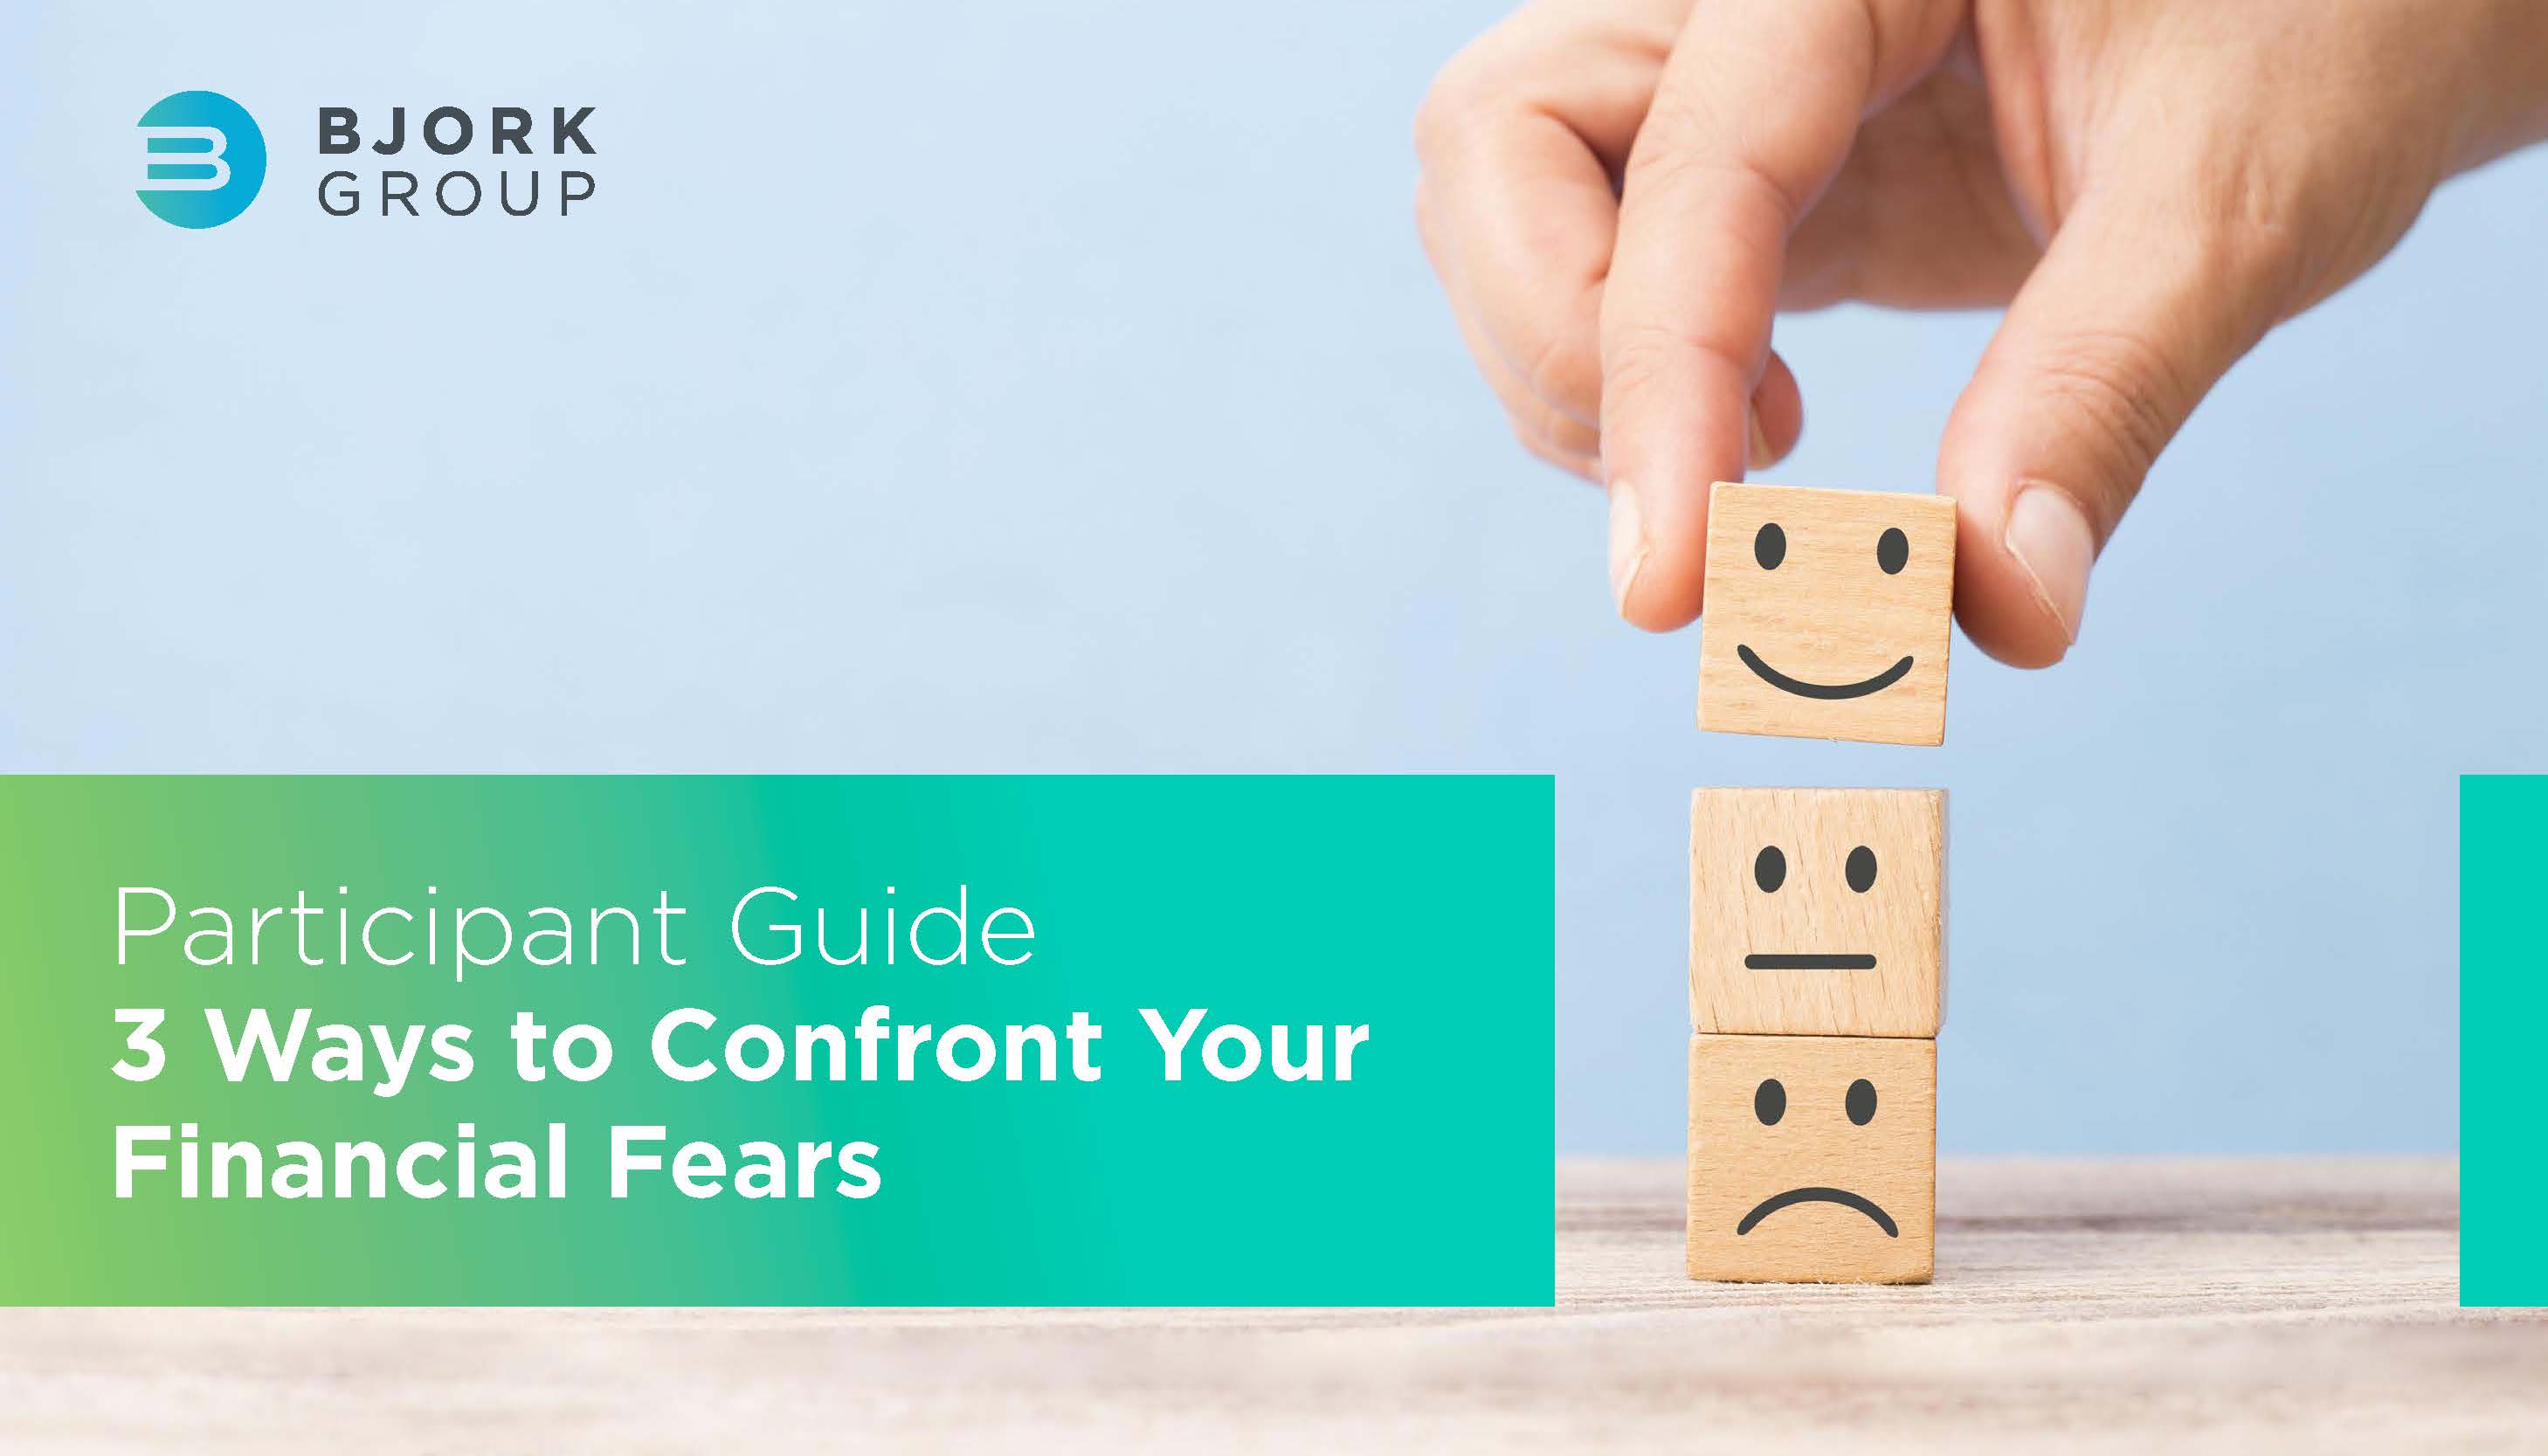 Headline Image - 3 Ways to Confront Your Financial Fears